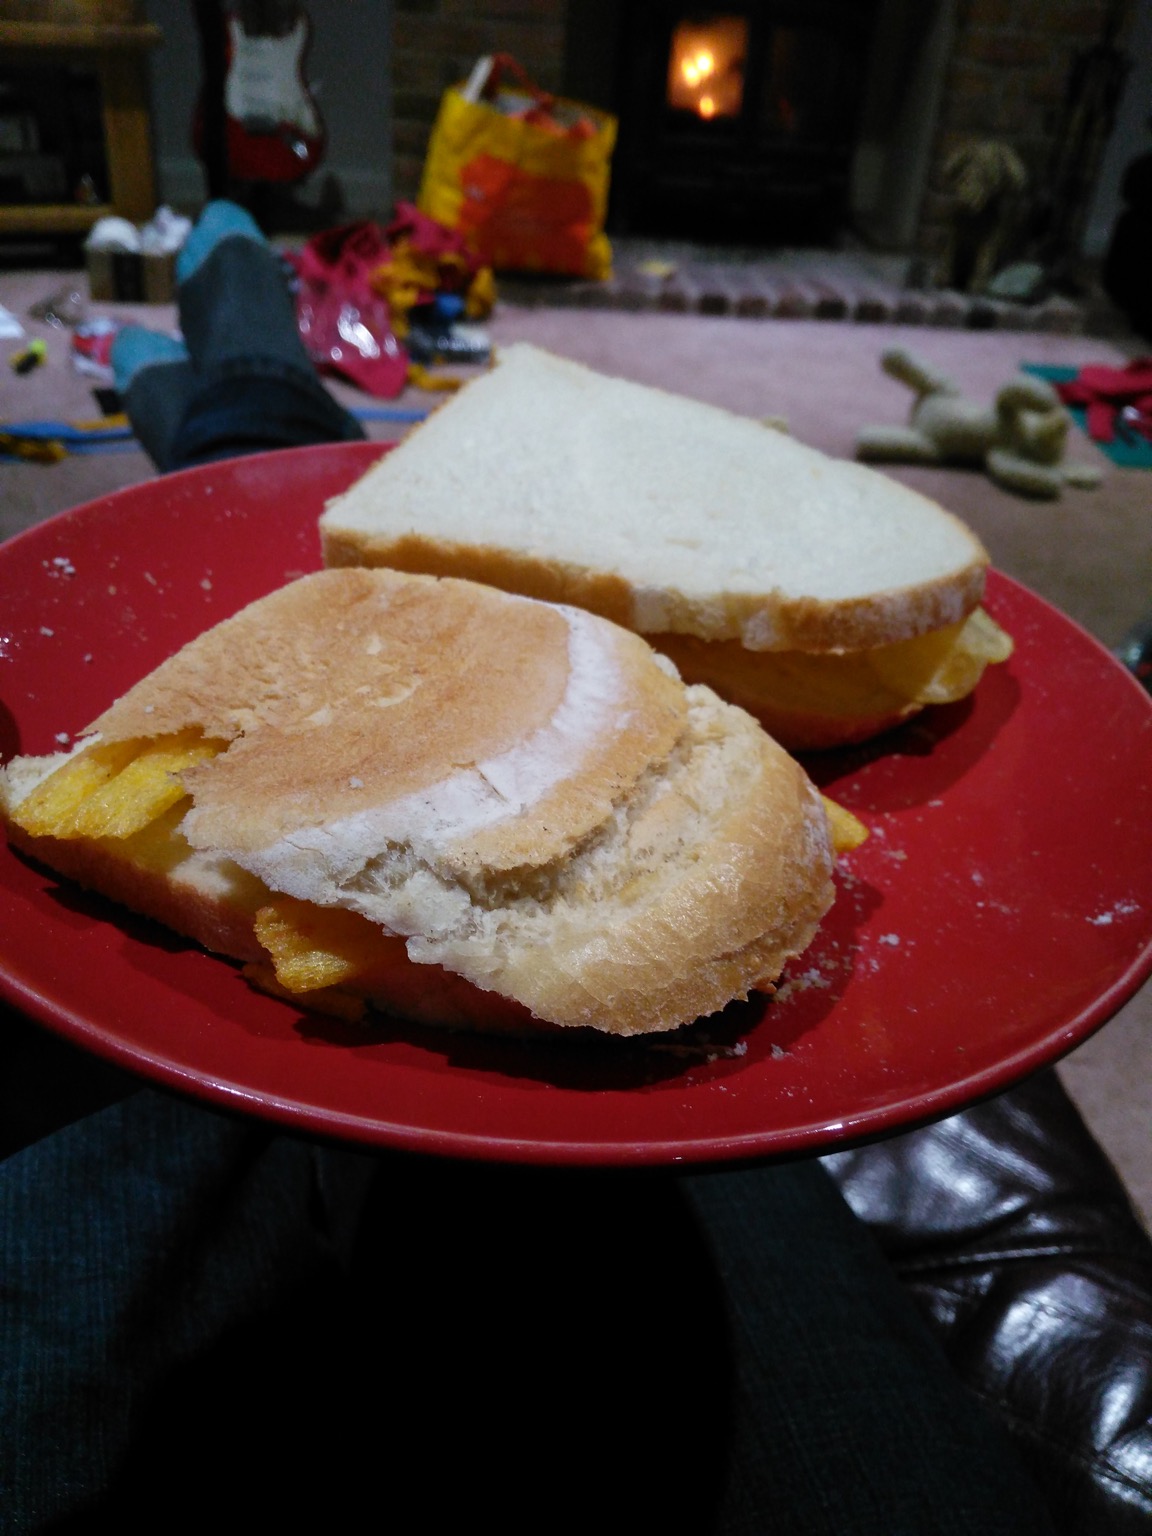 Two sandwiches containing crisps and Frazzles